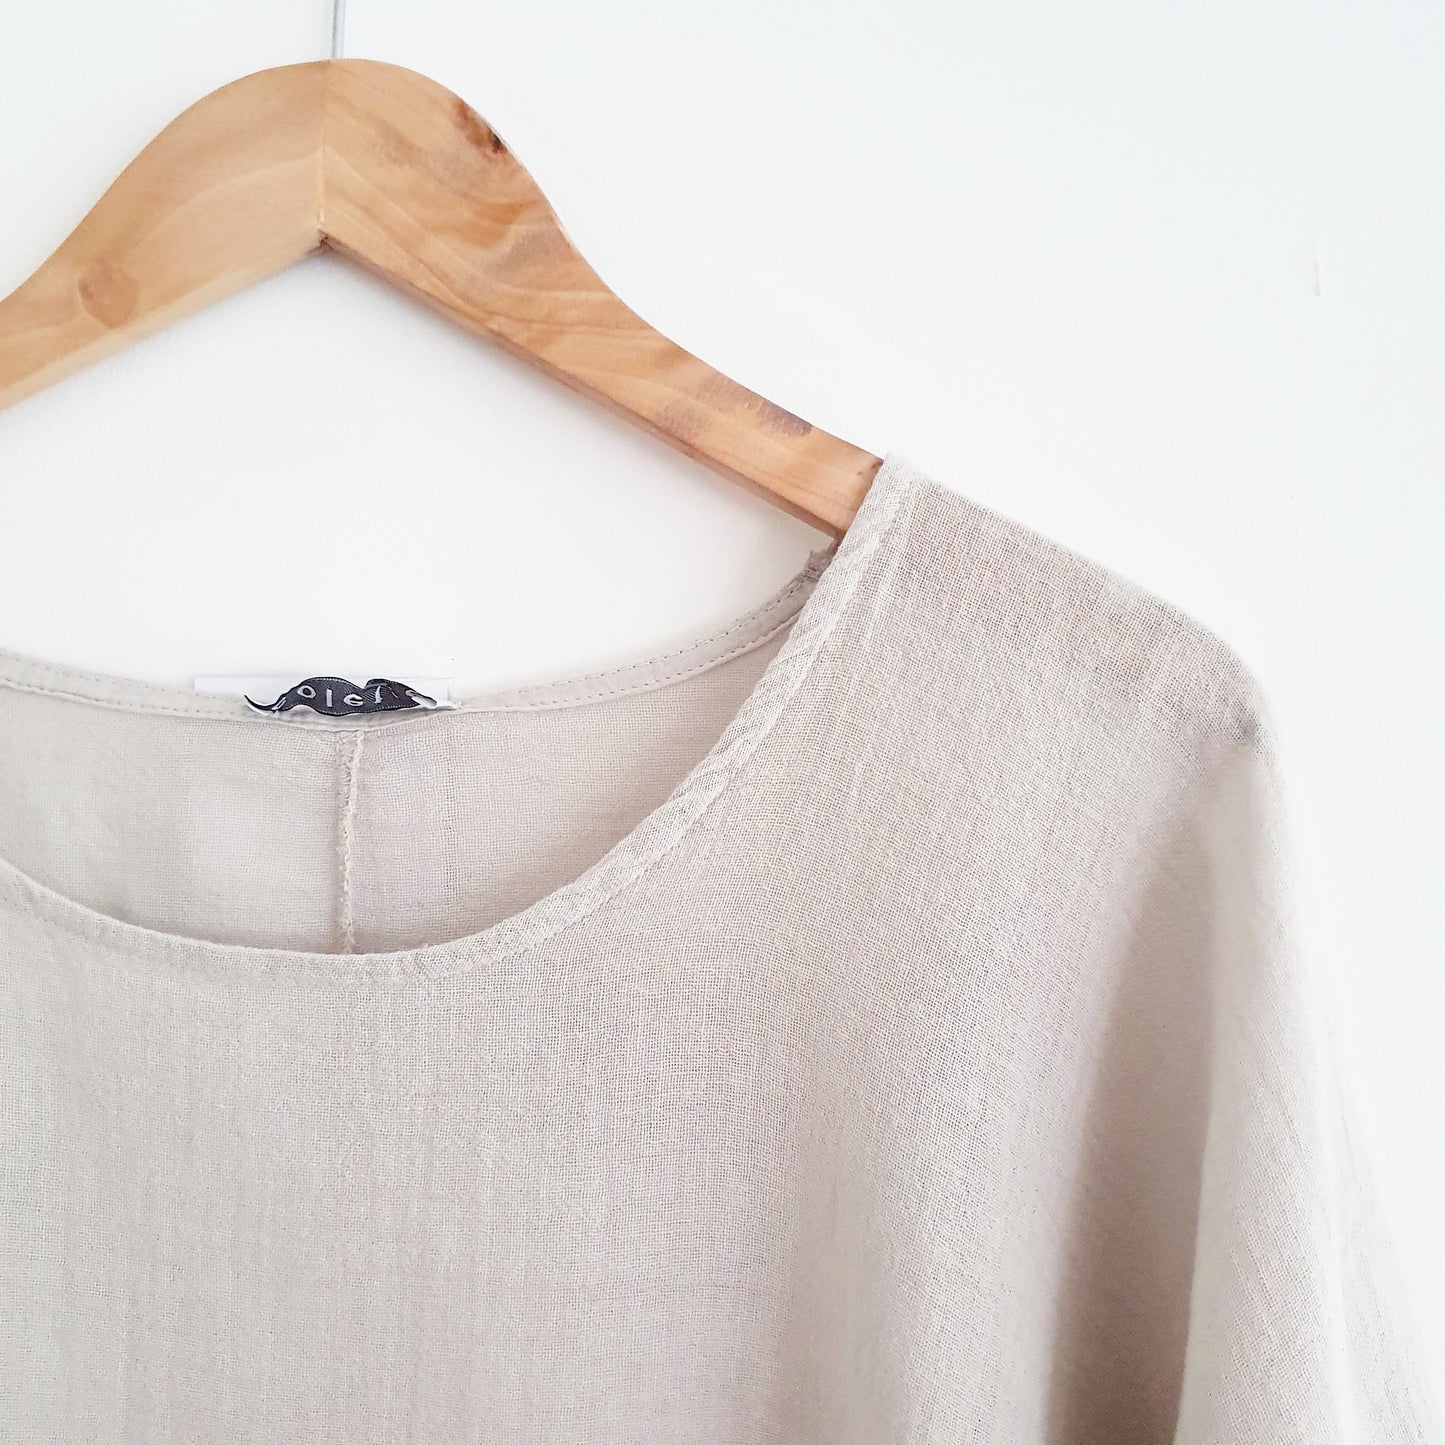 Cropped Linen Top in Stone